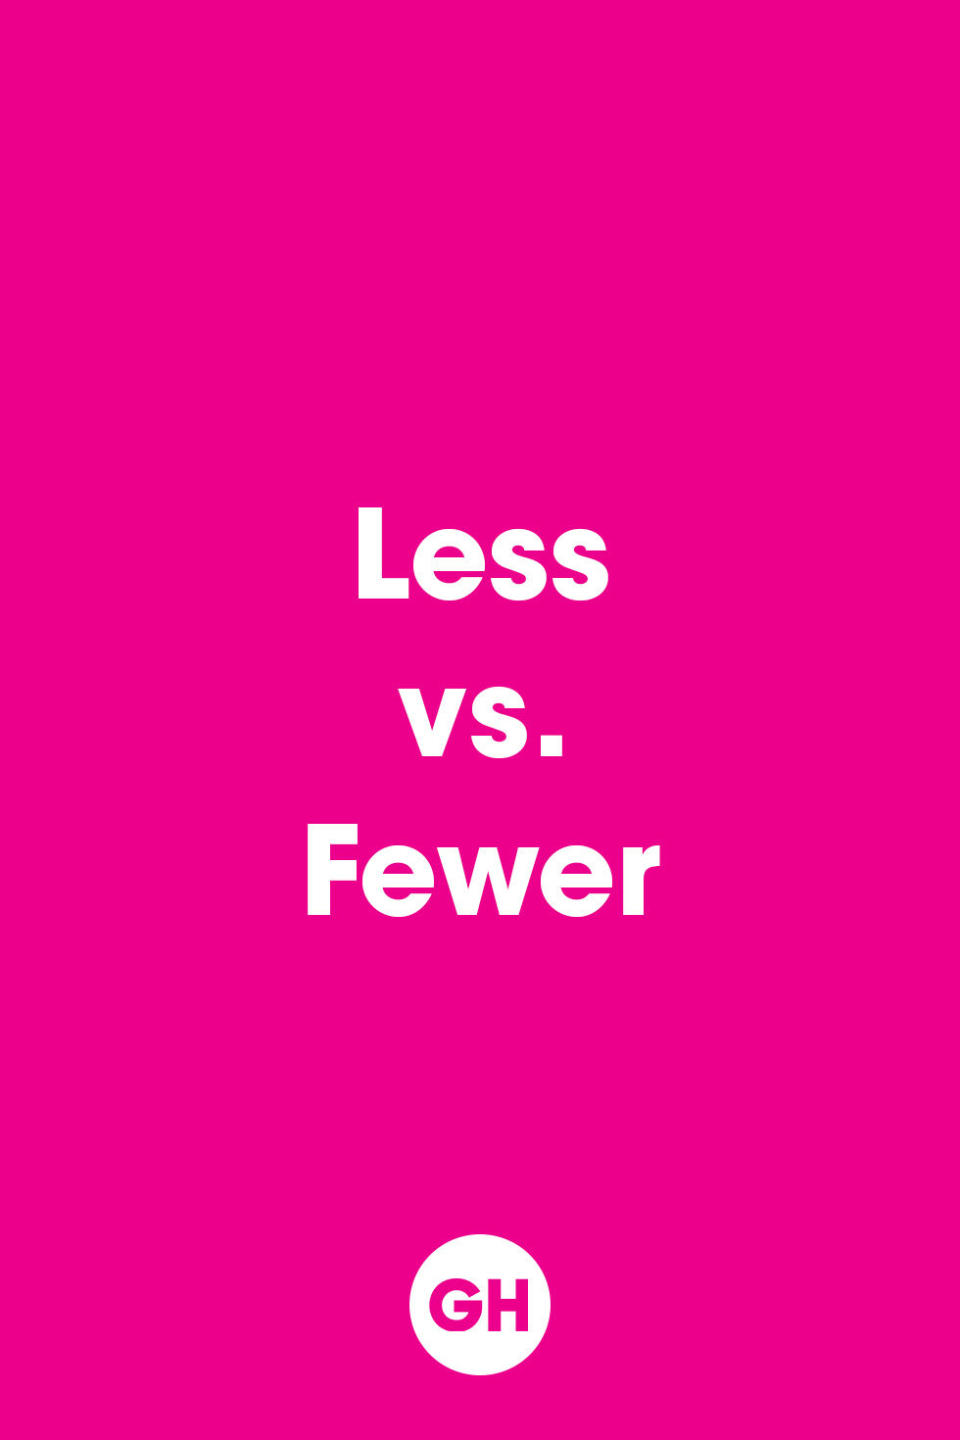 <p>Fewer = quantifiable subjects (puppies!). Less = subjects that aren't quantifiable (love!).</p>